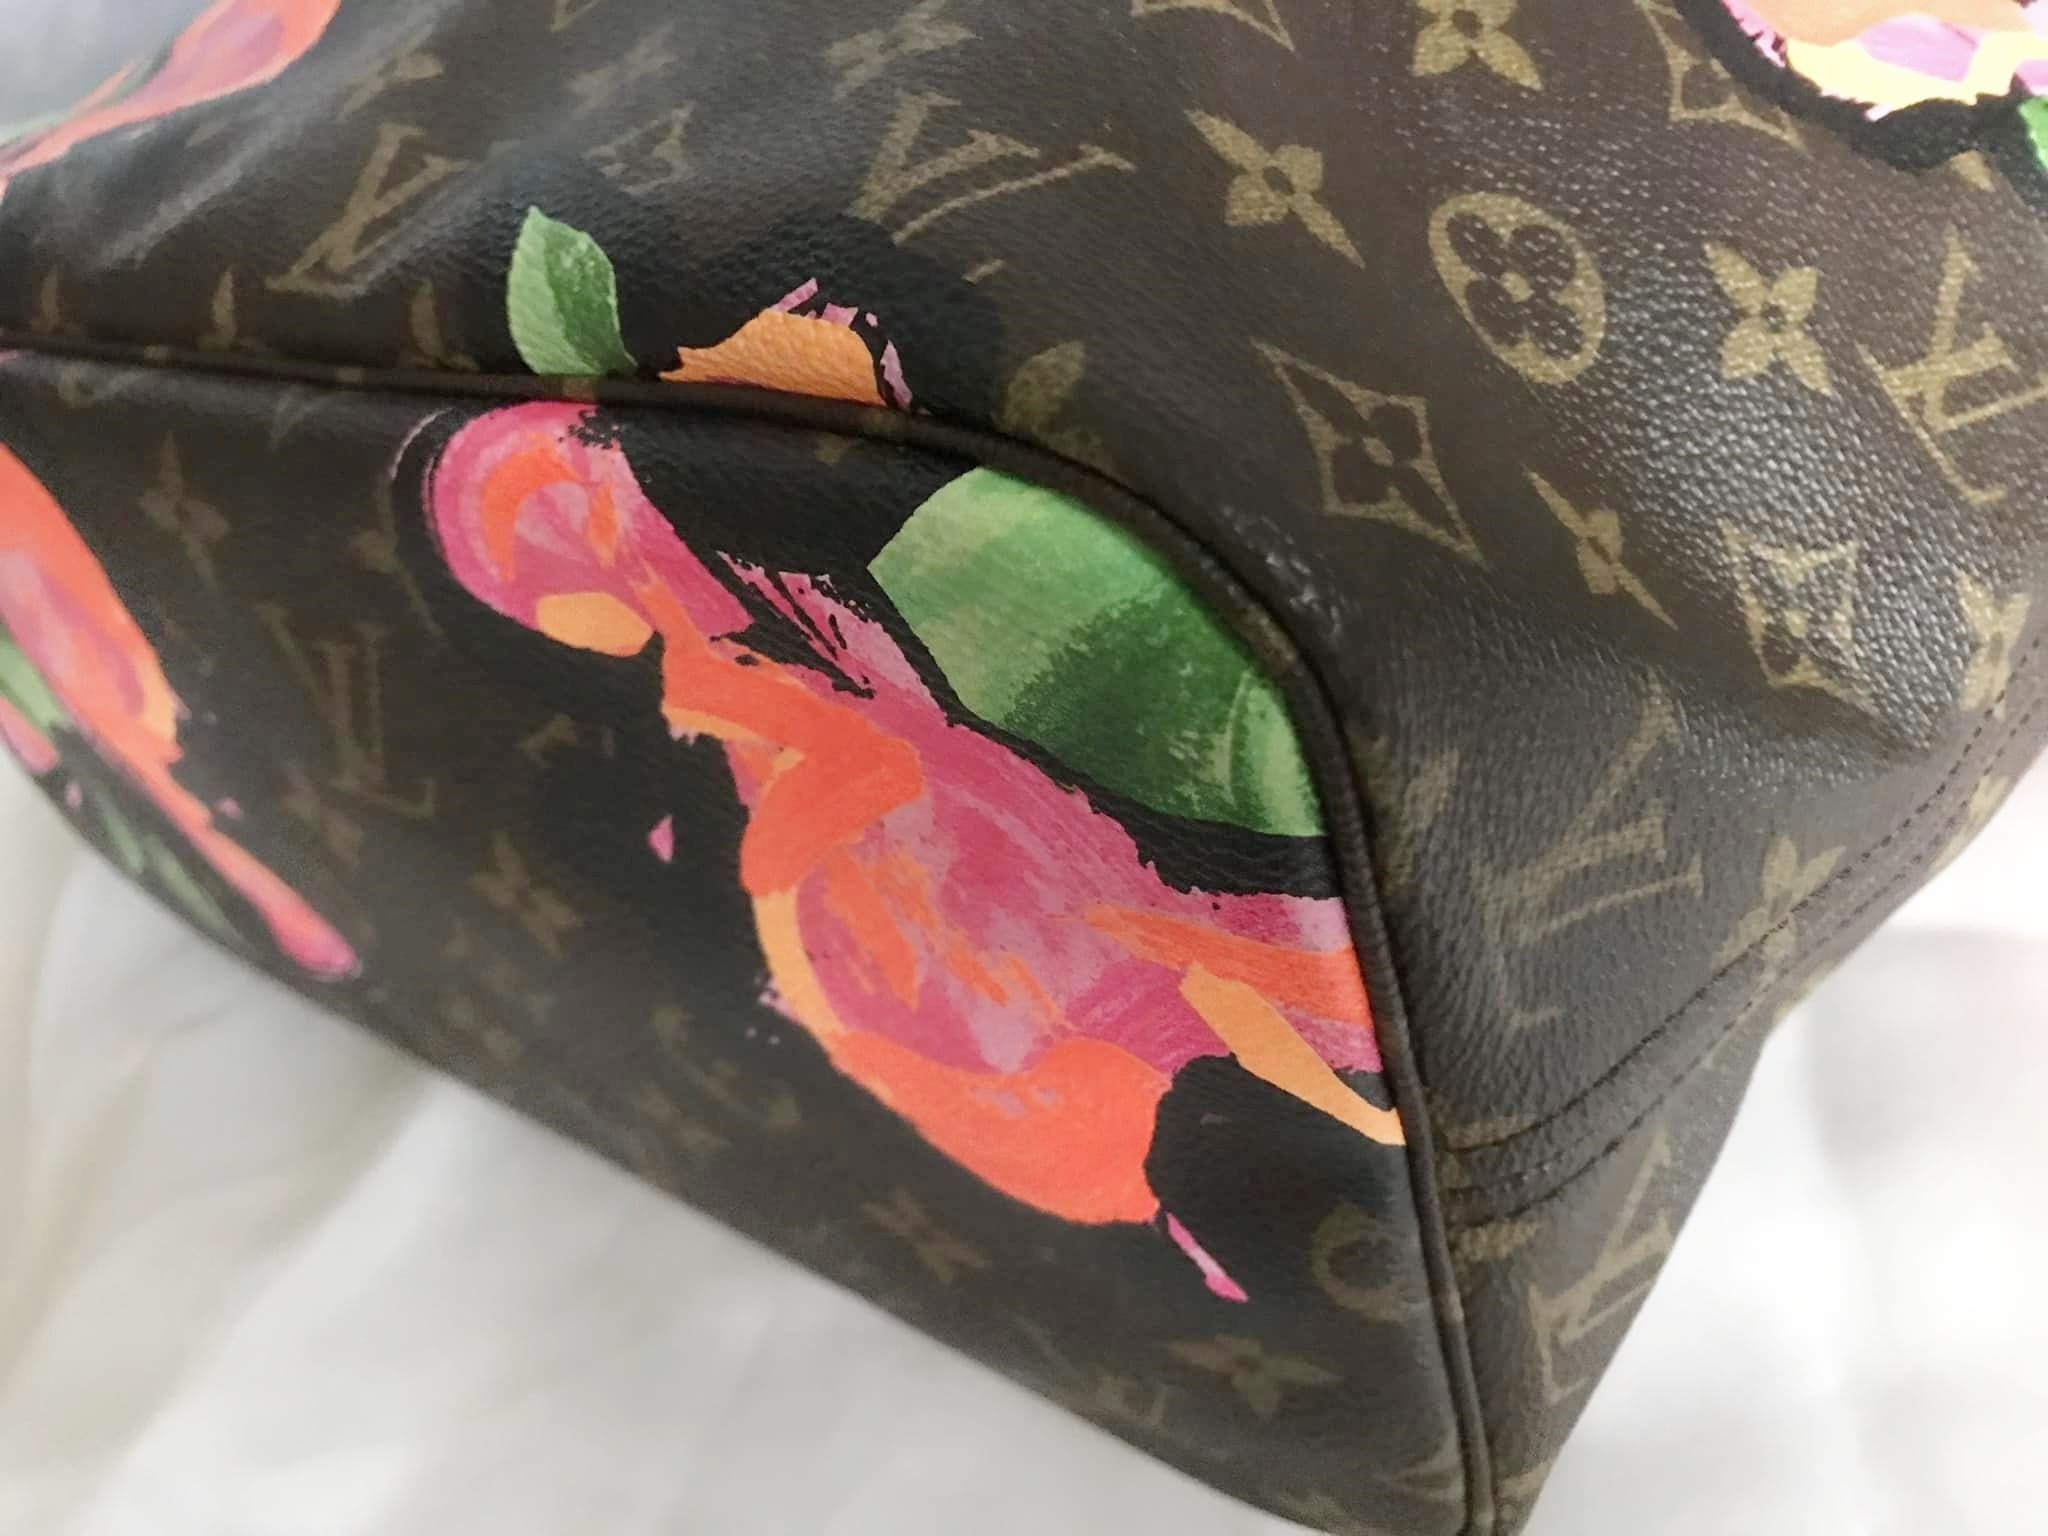 Louis Vuitton Neverfull Limited Edition Wallpapers  Louis vuitton pattern, Louis  vuitton background, Louis vuitton neverfull